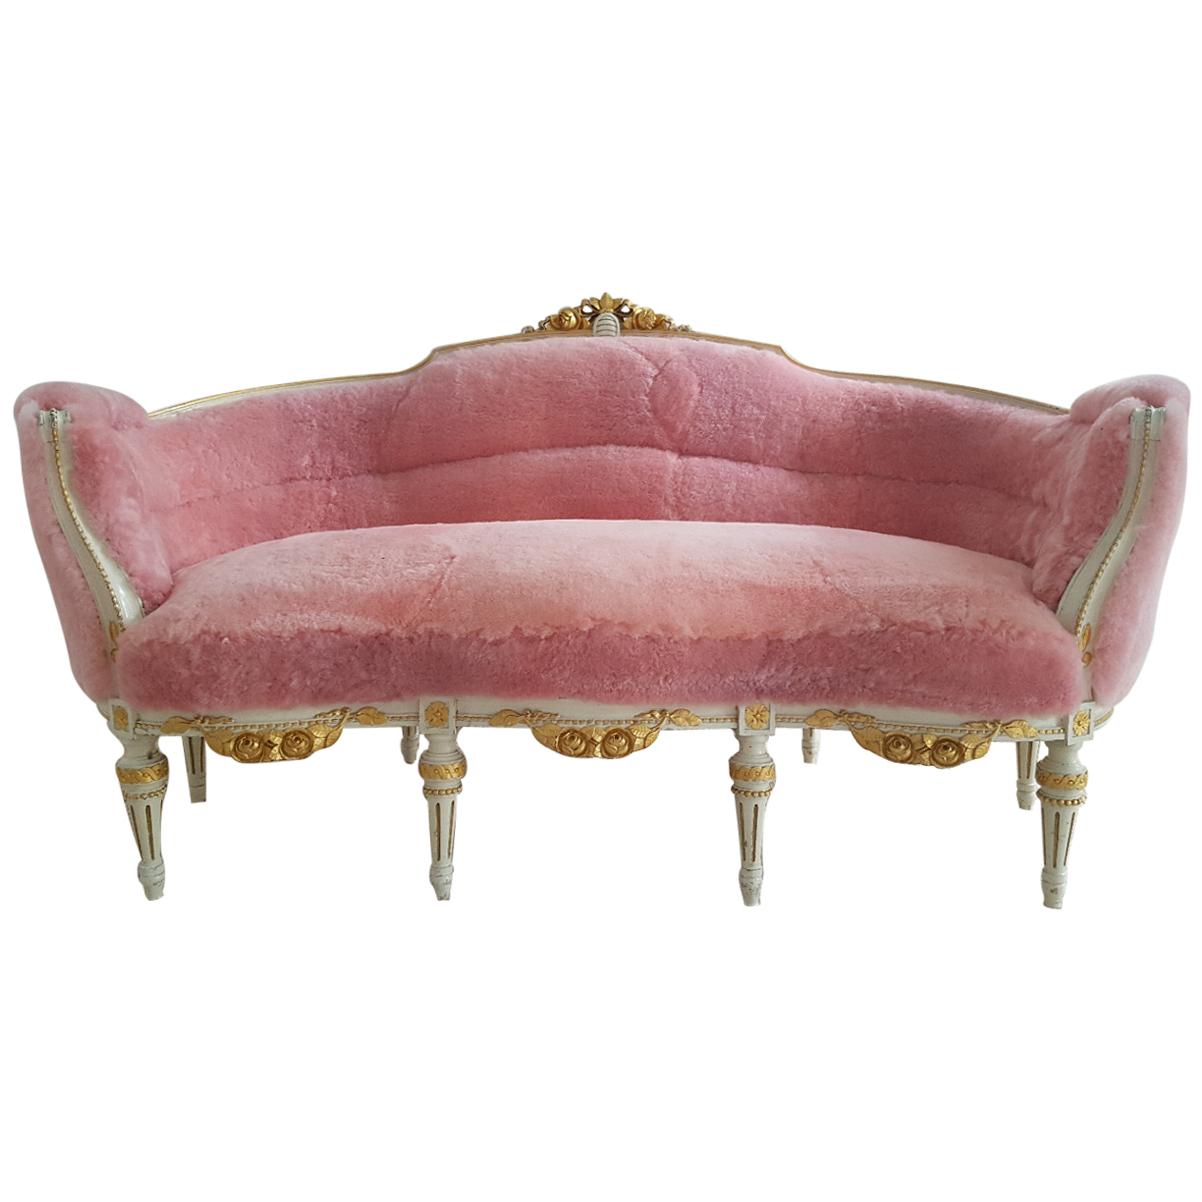 Gustavian Style Sofa with Pink Shearling Upholstery